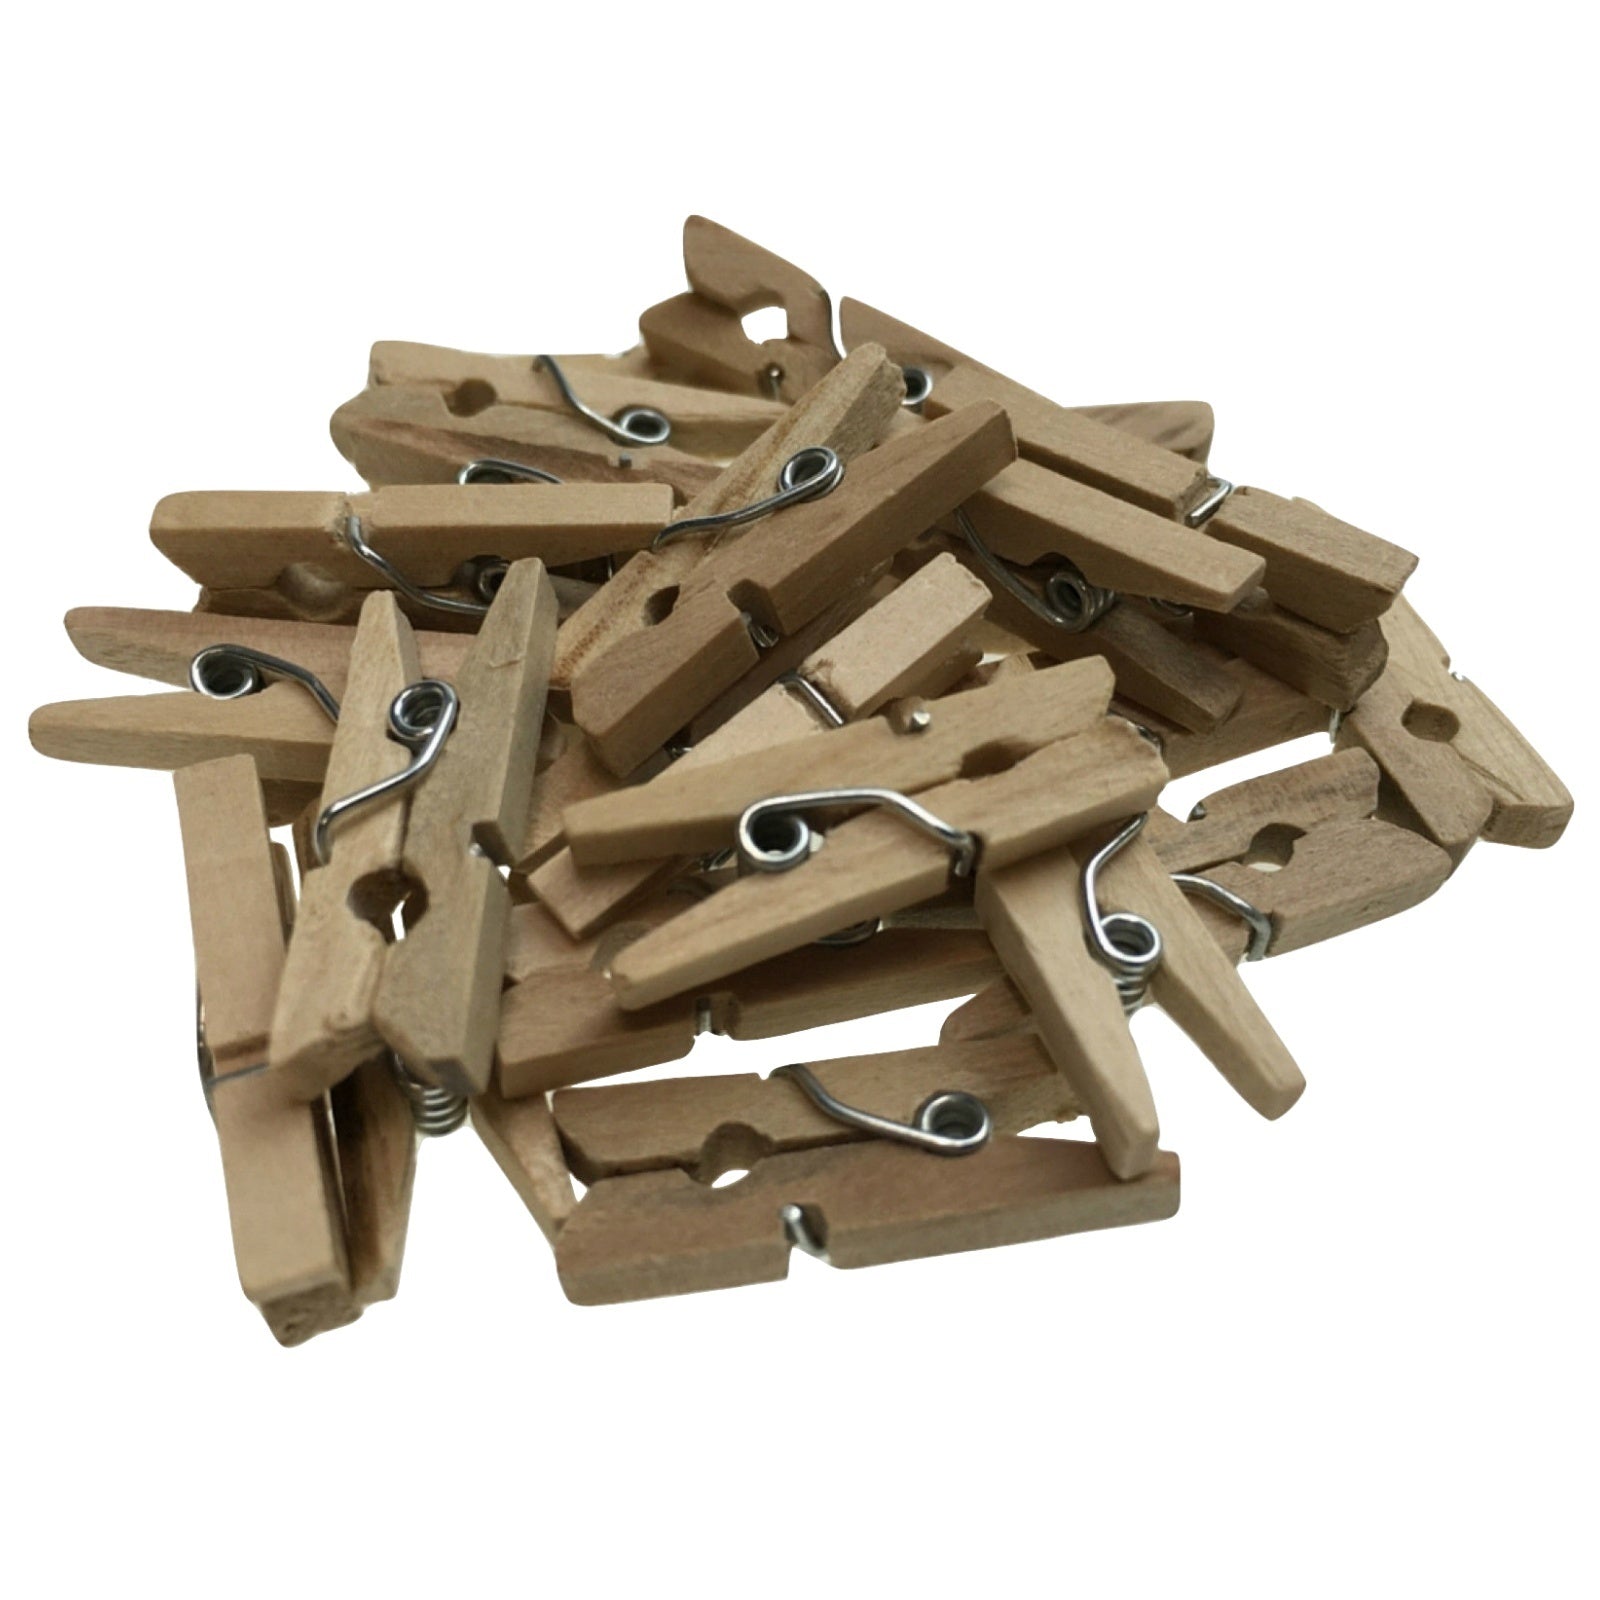 200pc Set Mini Wooden Pegs Craft Scrapbook Shower Clothes Pin 25mm